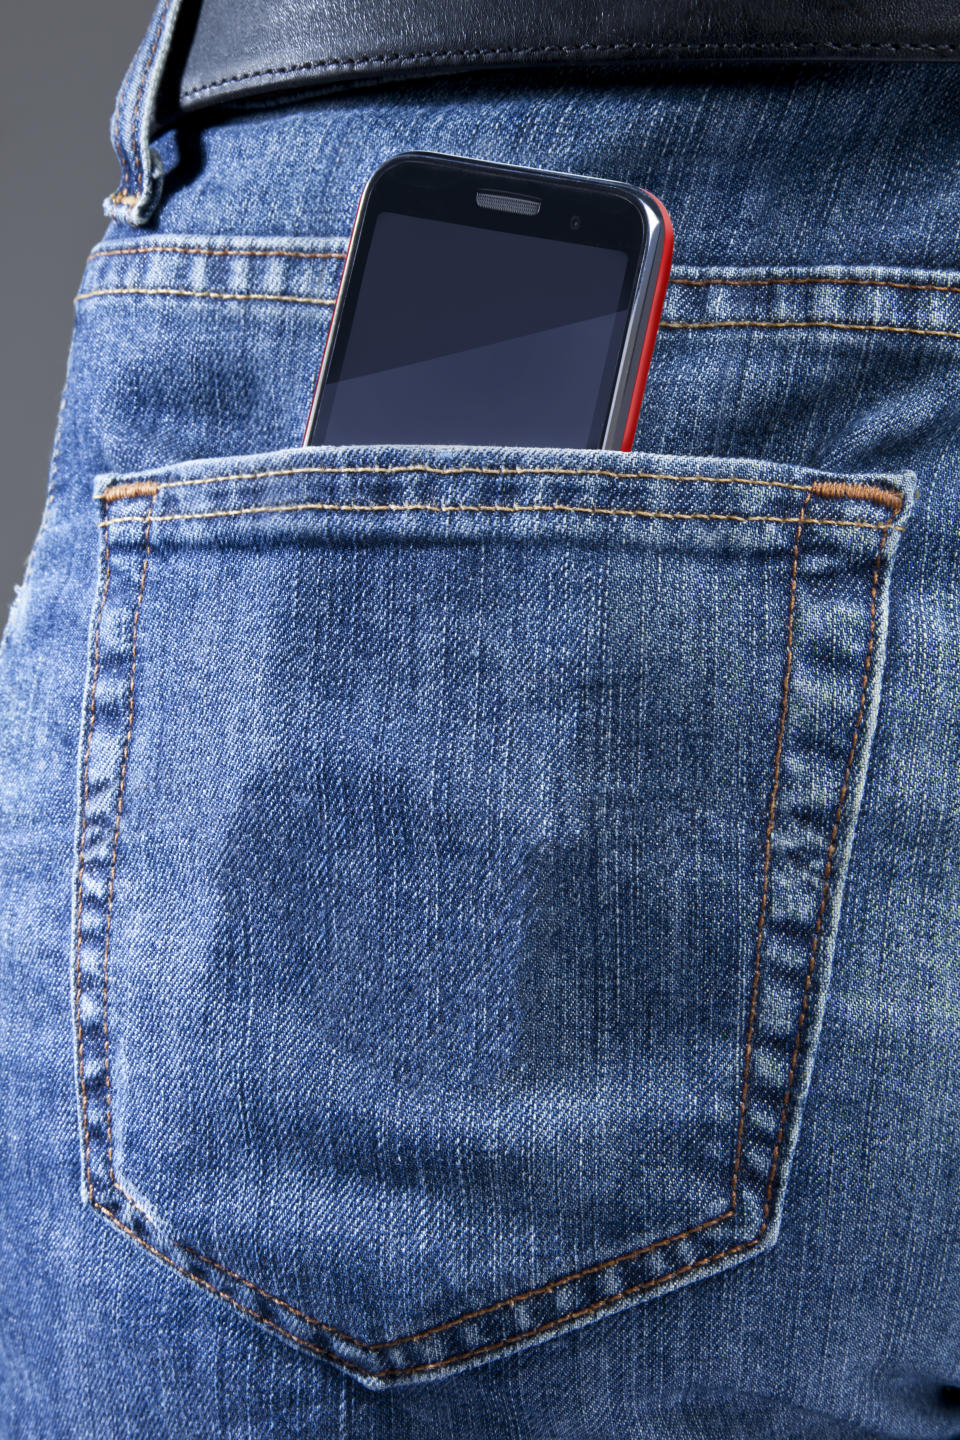 Smartphone in the blue jeans pocket.